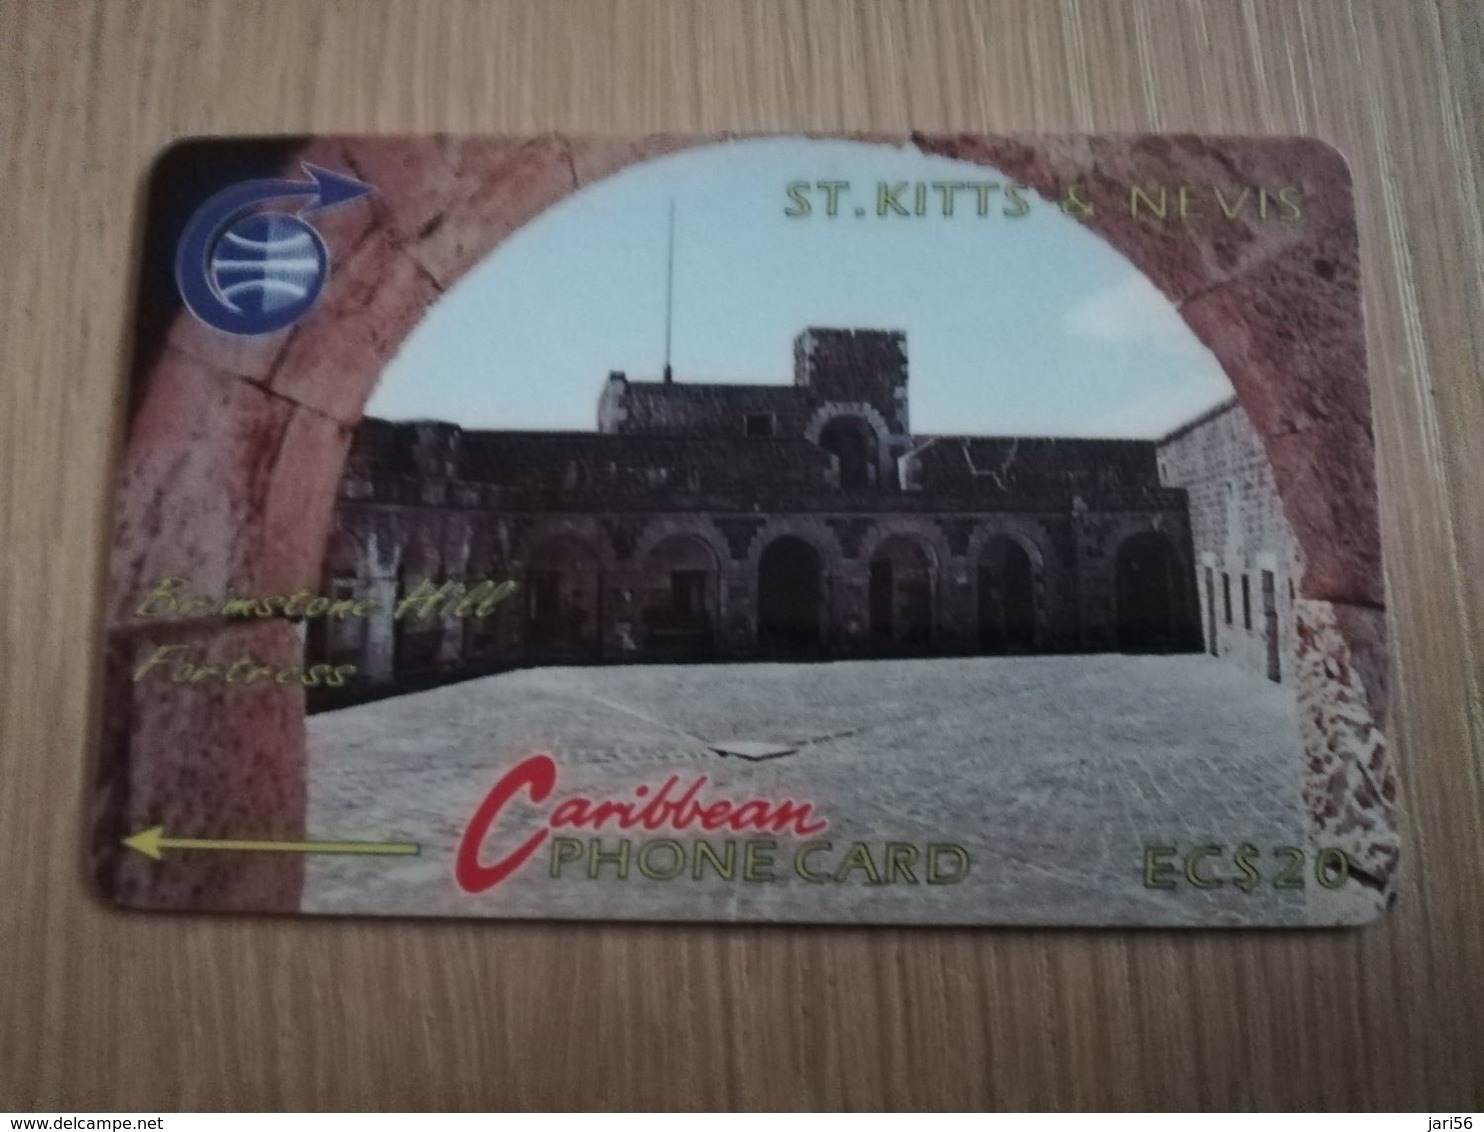 ST KITTS & NEVIS   GPT CARD $20,-   3CSKC     NO STK-3C   BRIMSTONE HILL FORTRESS  2    Fine Used Card  **2330** - St. Kitts En Nevis